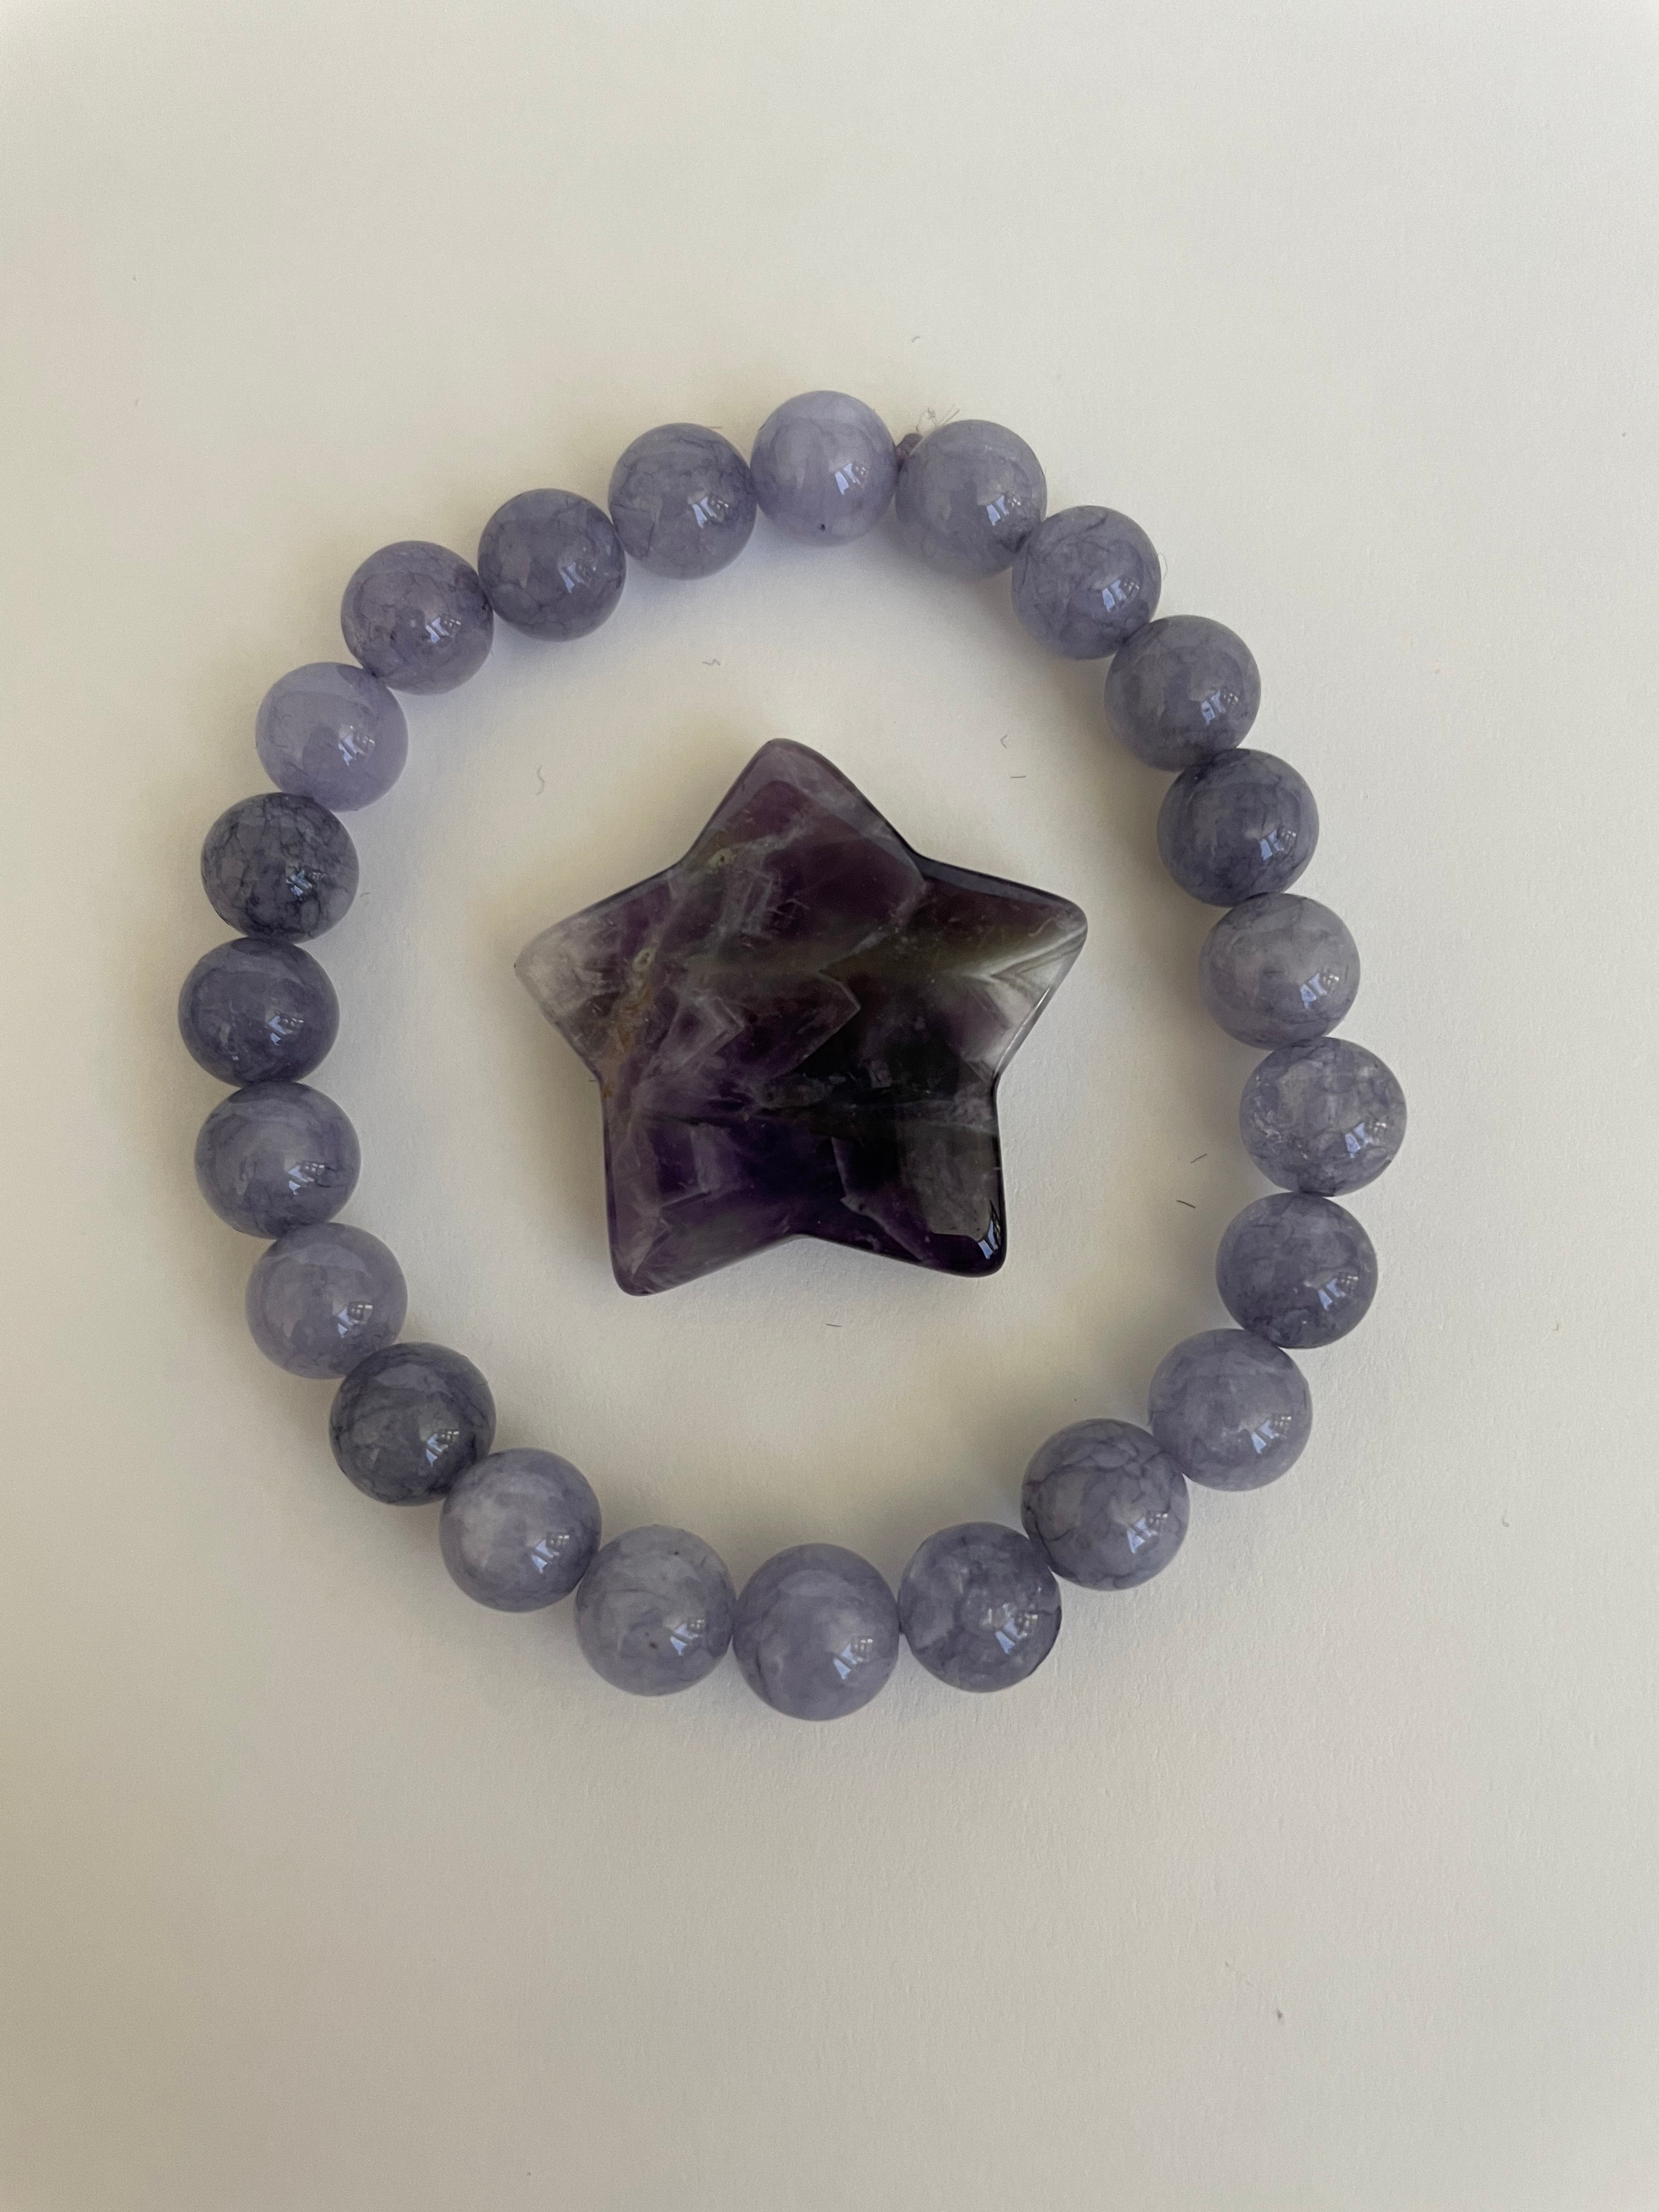 Love this little chevron amethyst star! It can be used for meditation, healing, for your altar or as décor for any room in your home or office. Easy to slip right into your pocket so you have the energy of amethyst everywhere you go. Approximately 1¼". Cost is $6.